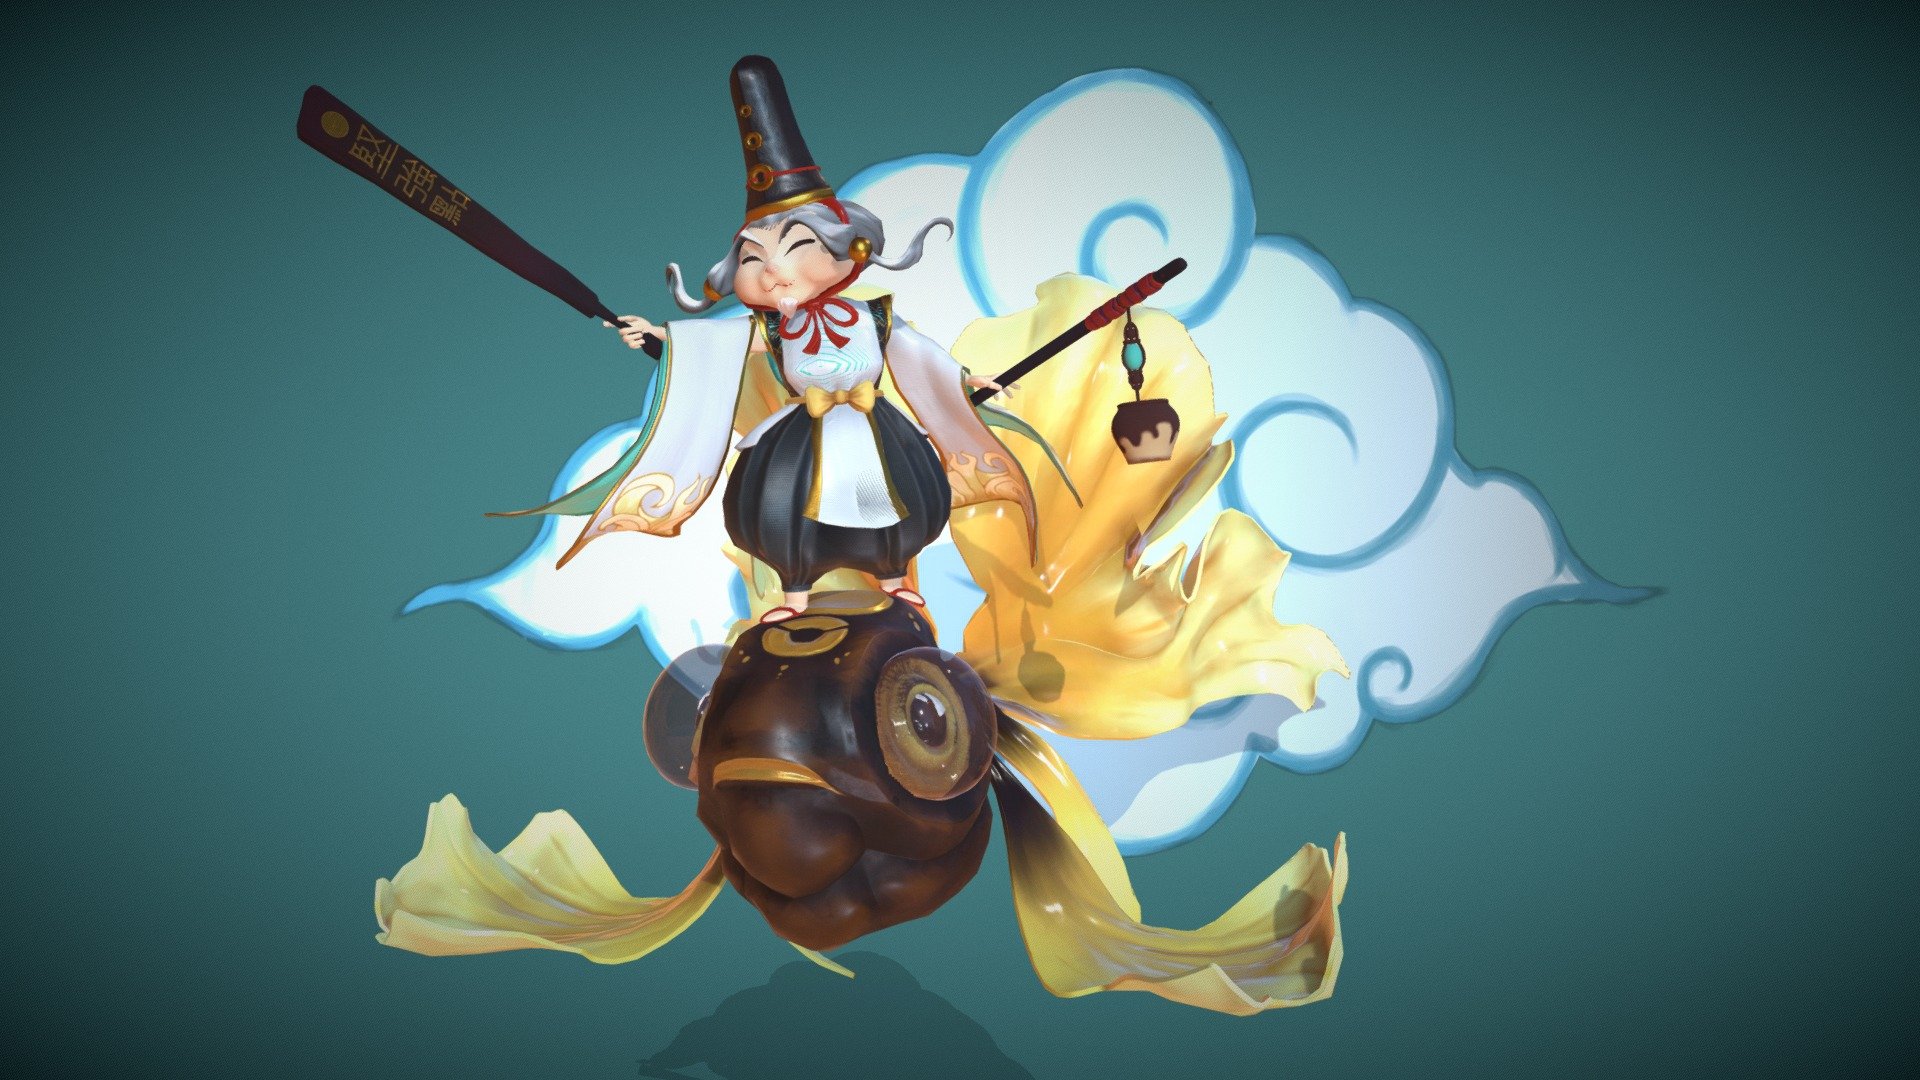 Ebisu 3D Character from Onmyoji (NetEase games)
Blocking, Sculpting - ZBrush,
Retopology and UnWrap - Maya,
Baking and Materials - SubstancePainter.
Beauty Renders done in Arnold 3d model